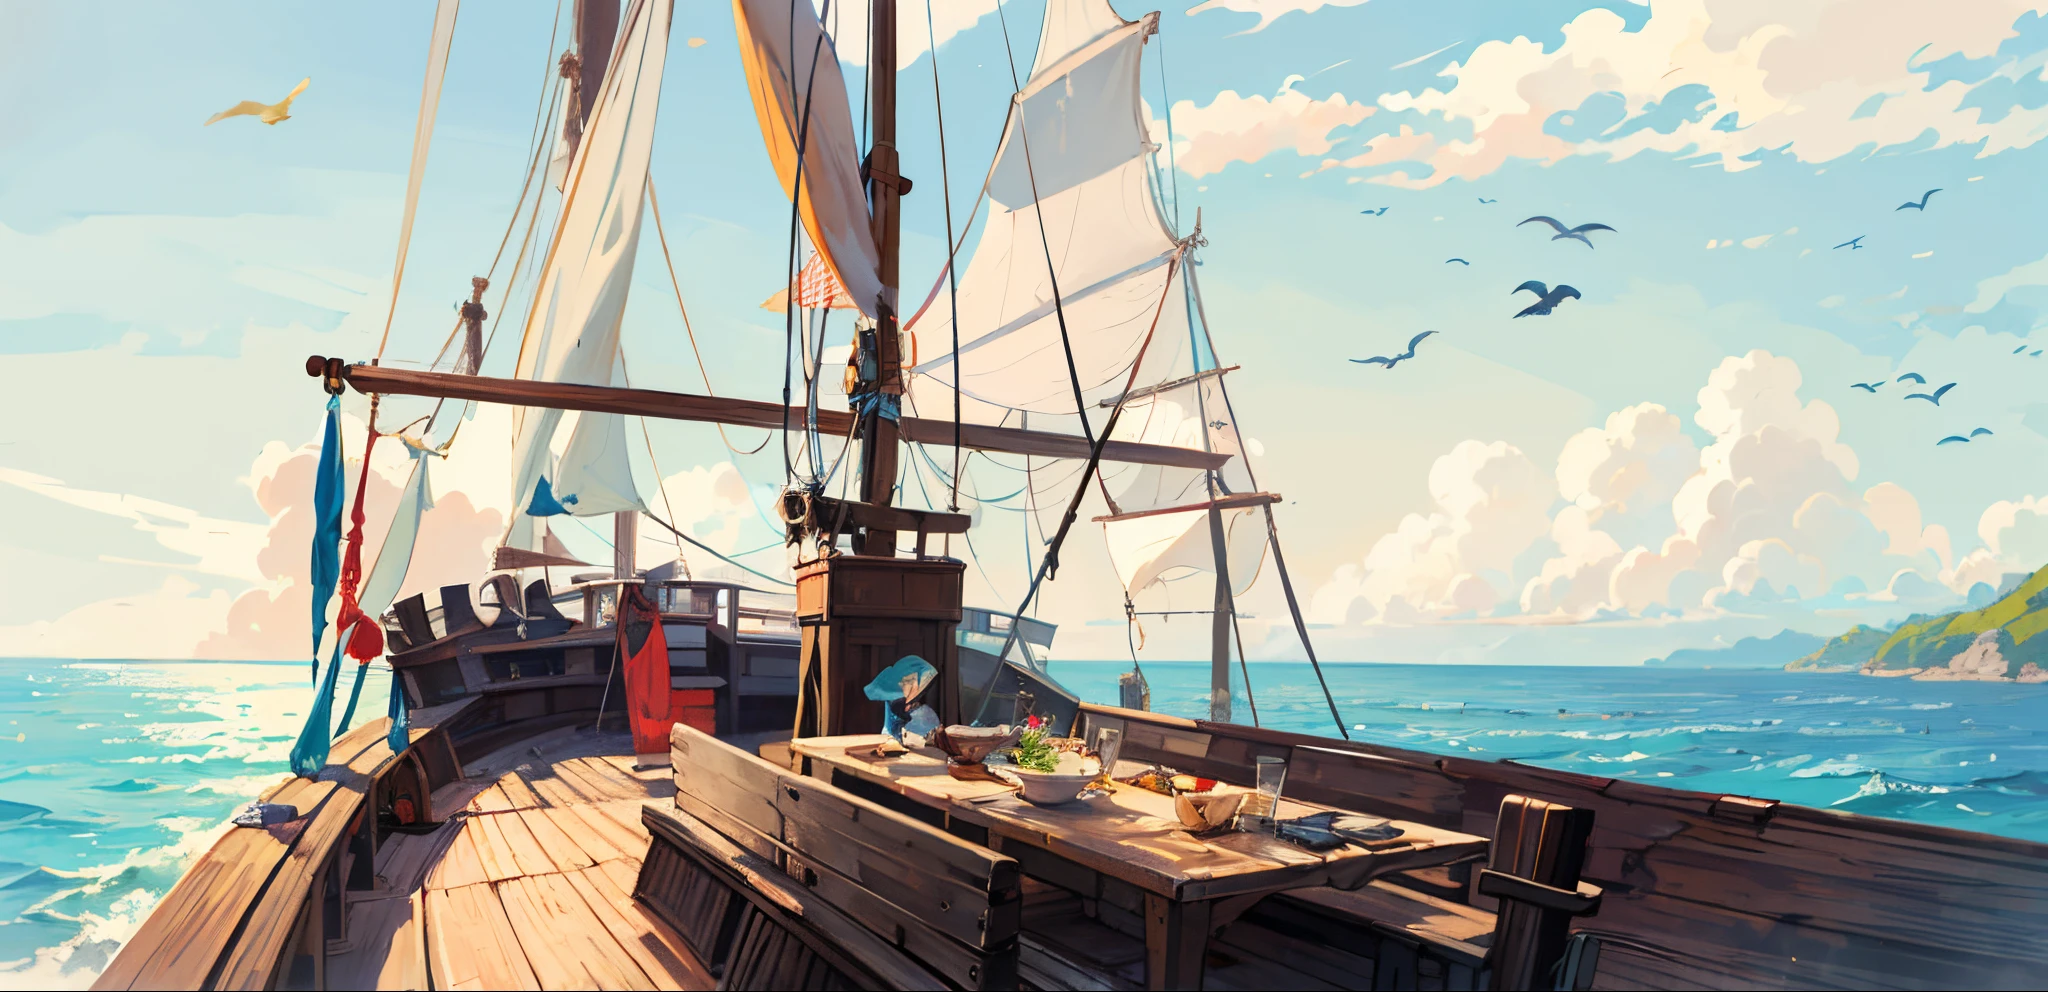 pirate ships, Local, the detail, day, Scavenging, at noon, ((and the sun was shining brightly)), at noon, bow detail, Boat,vessels, the ocean, Boat, cloud, ((blue-sky)), Boat, scenecy, Outdoor sports, That bird, Eau, horizon, without humans,  Raging sea, suns